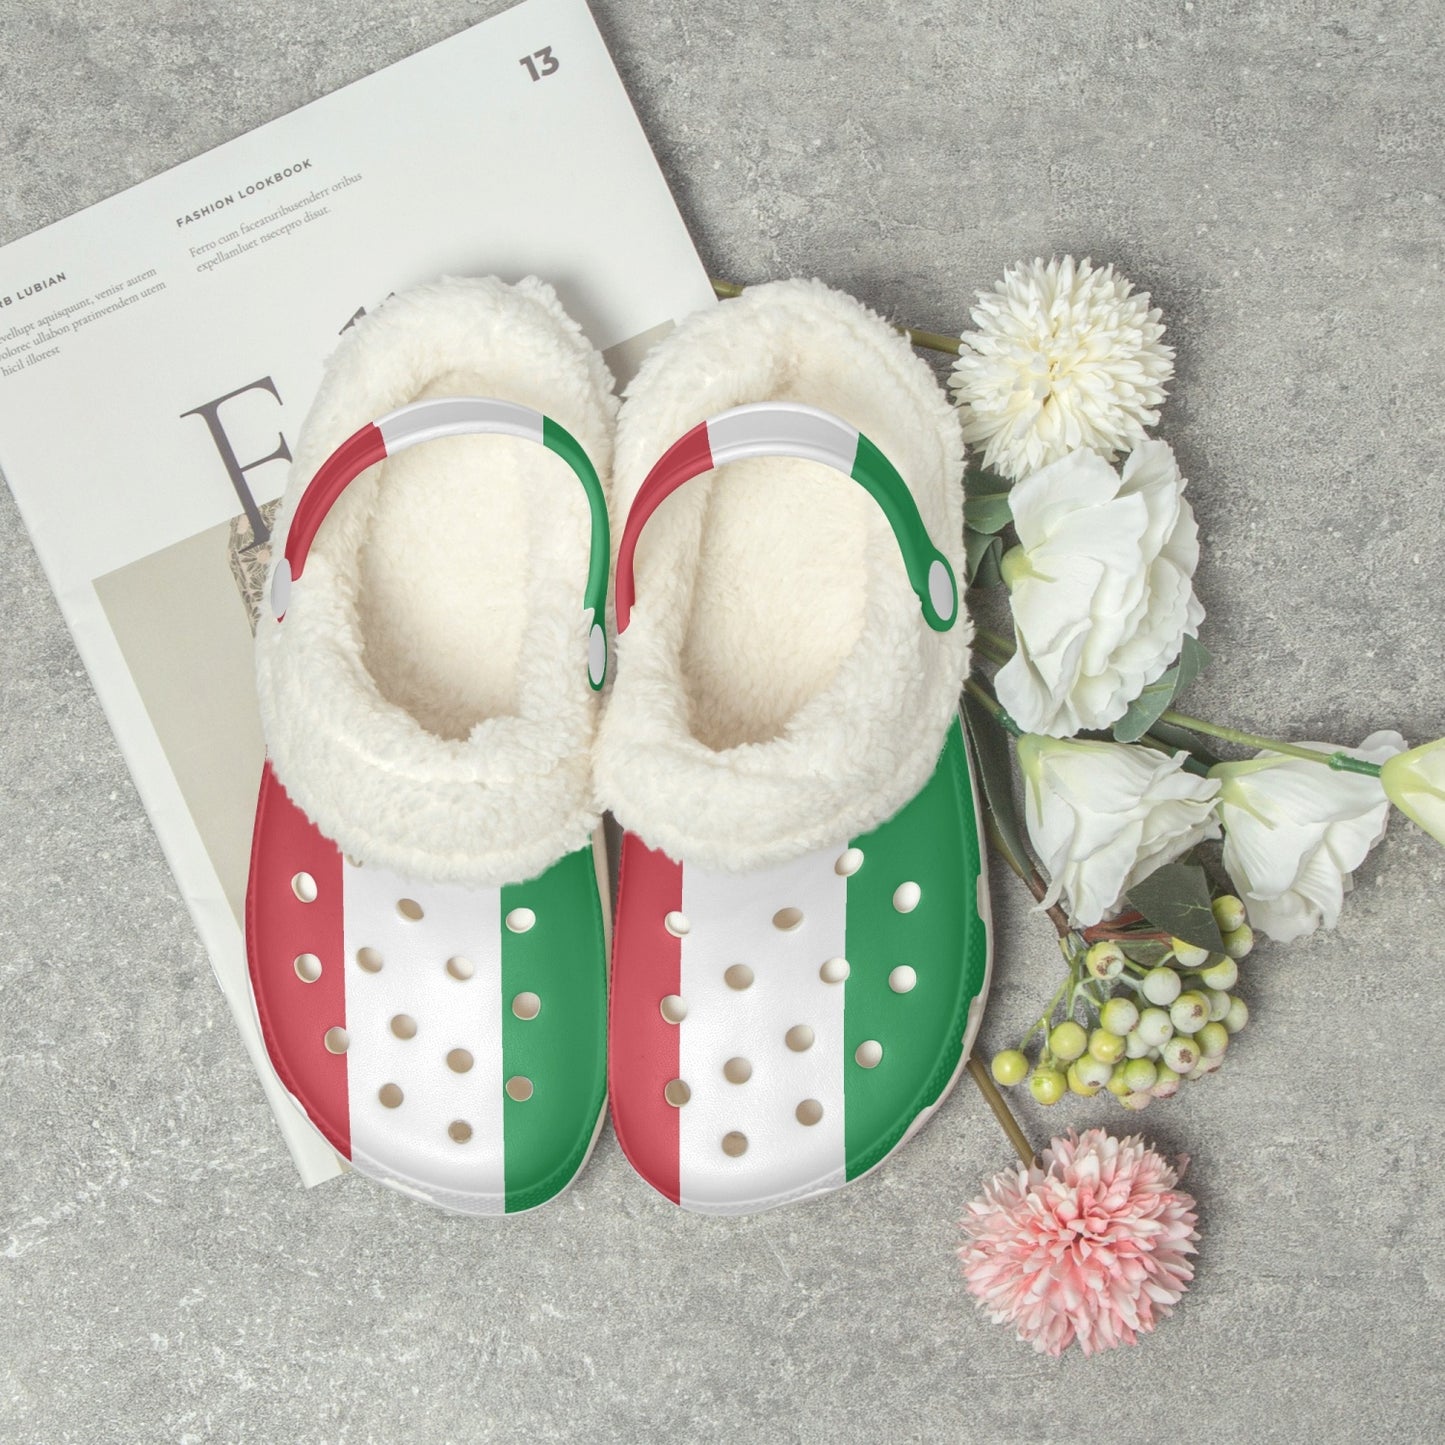 Italy Lined Winter Clogs